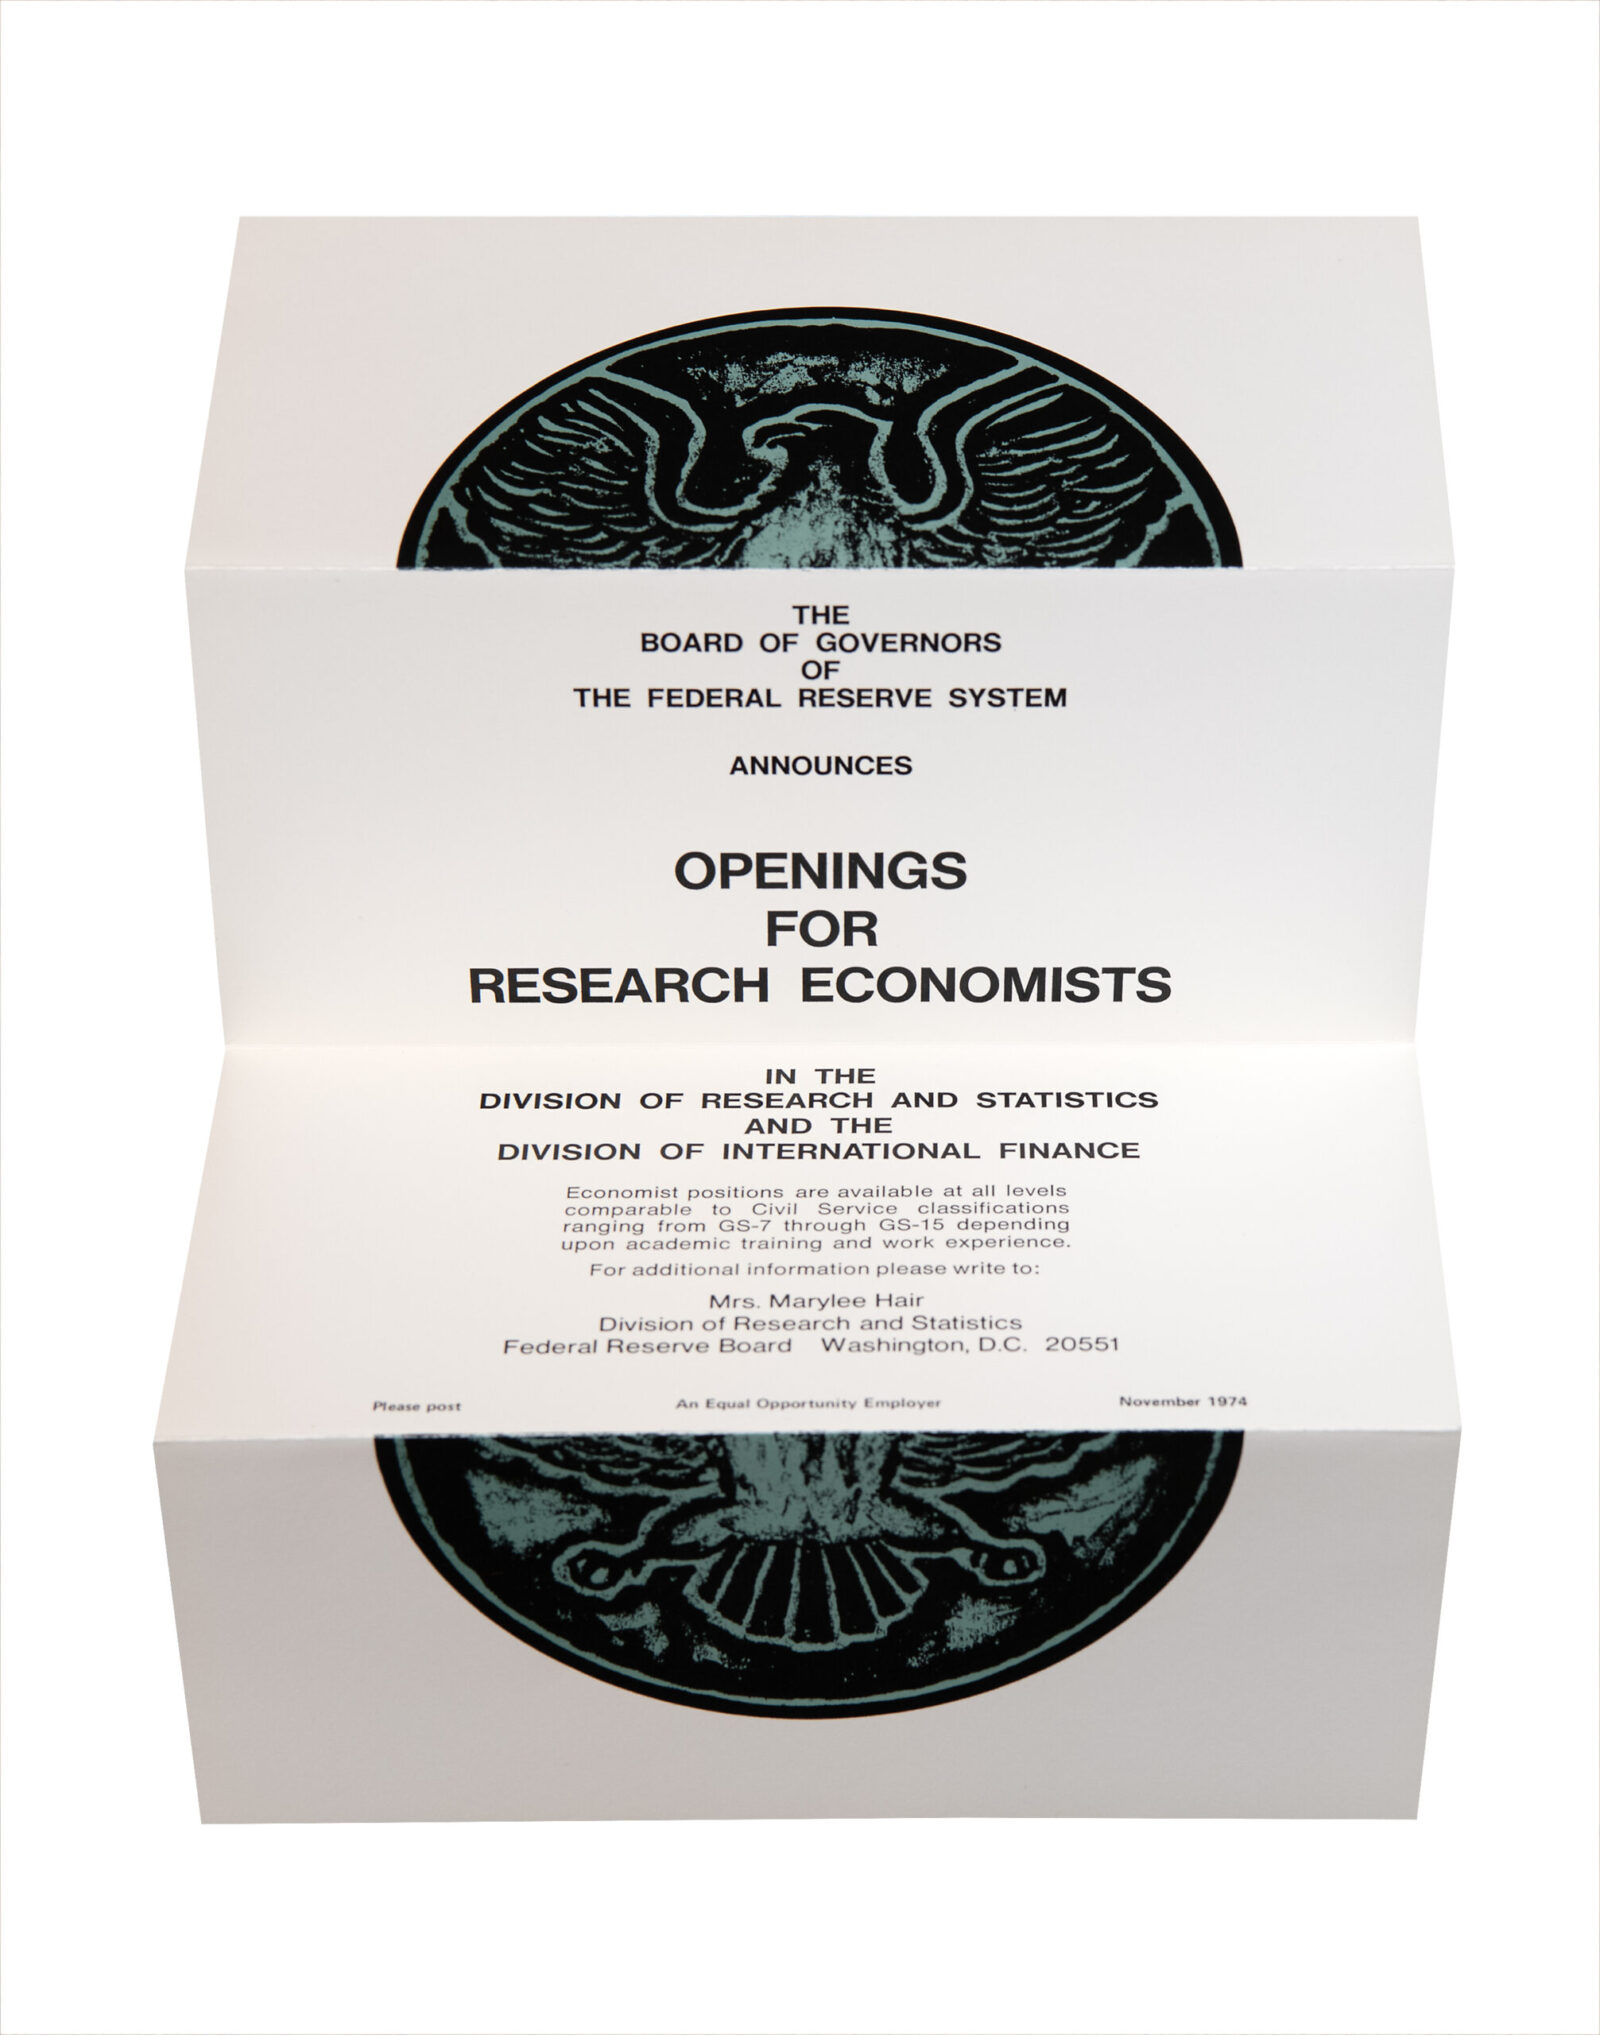 Recruitment piece for the Federal Reserve Board designed by Huber